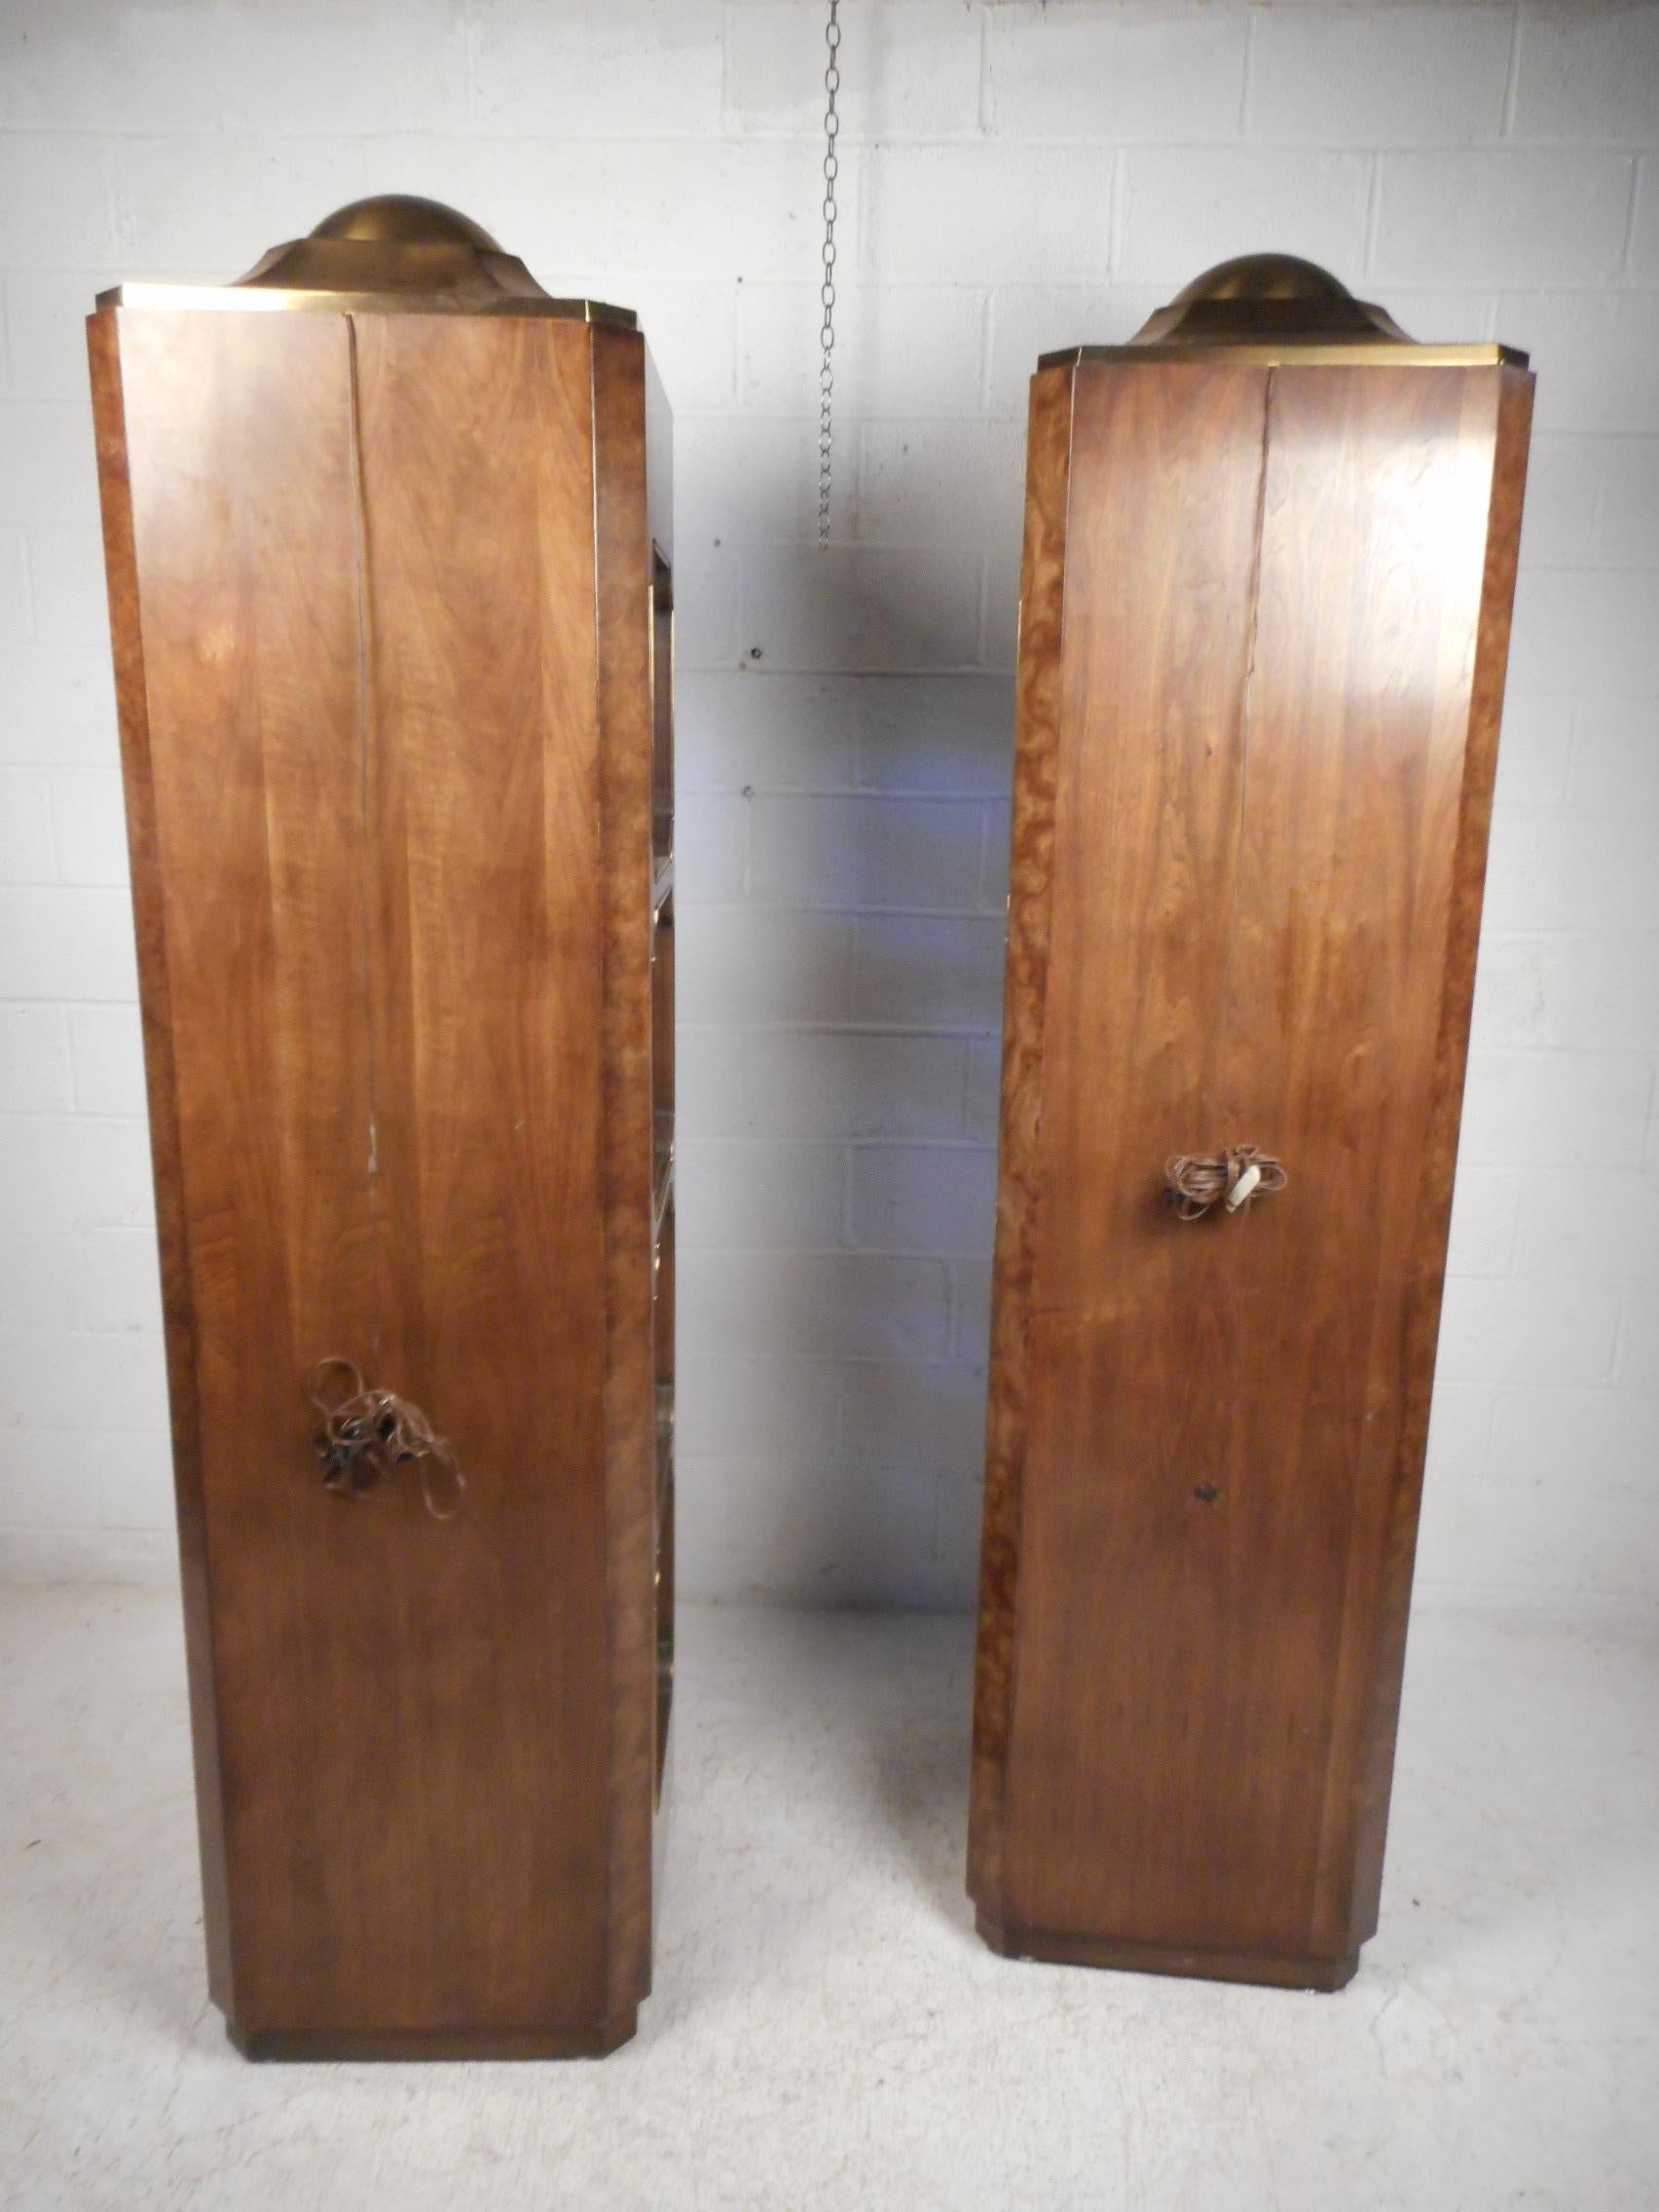 Impressive pair of midcentury curios/display cabinets by Mastercraft. Beautiful burl walnut throughout with brass accents and pulls. Ample storage/display space within. Functional display lights within the top of the cases illuminate the contents of